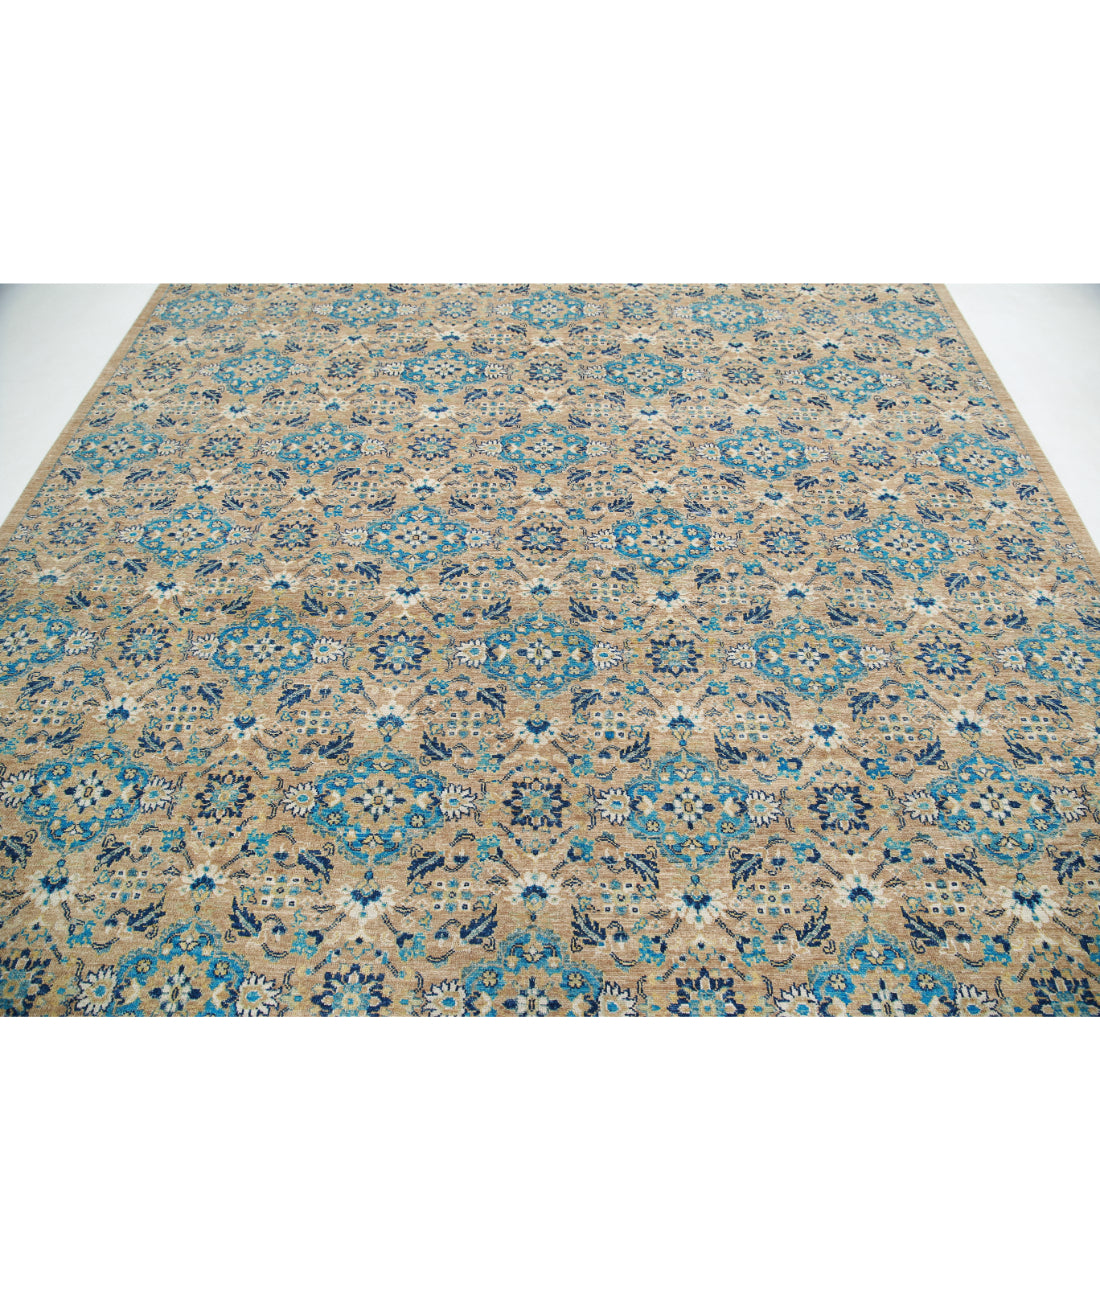 Hand Knotted Art & Craft Wool Rug - 8'10'' x 11'7'' 8'10'' x 11'7'' (265 X 348) / Taupe / Blue